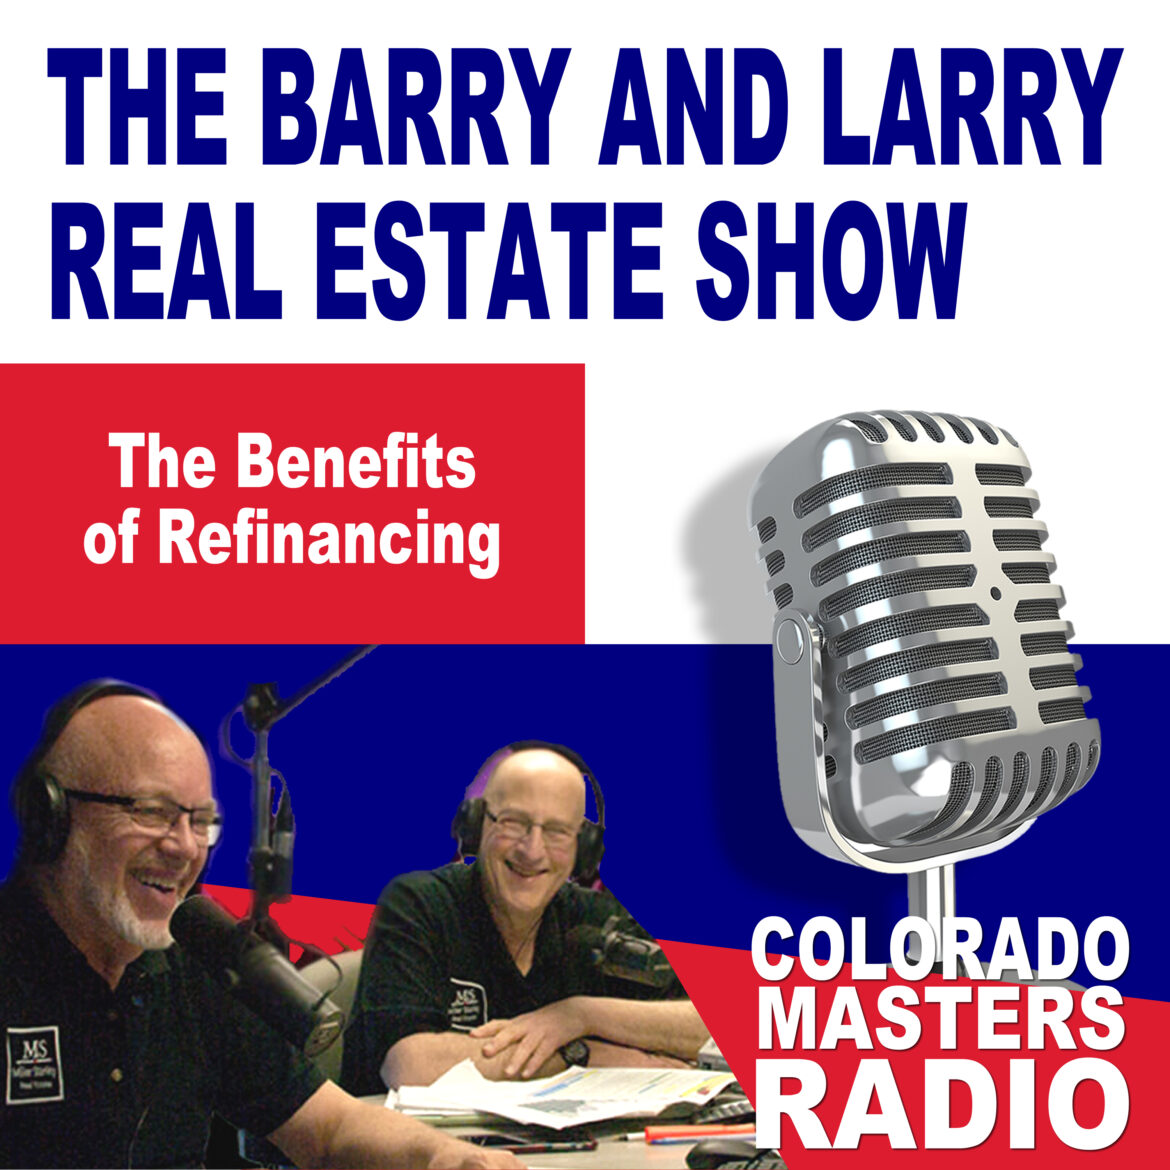 The Larry and Barry Real Estate Show - The Benefits of Refinancig